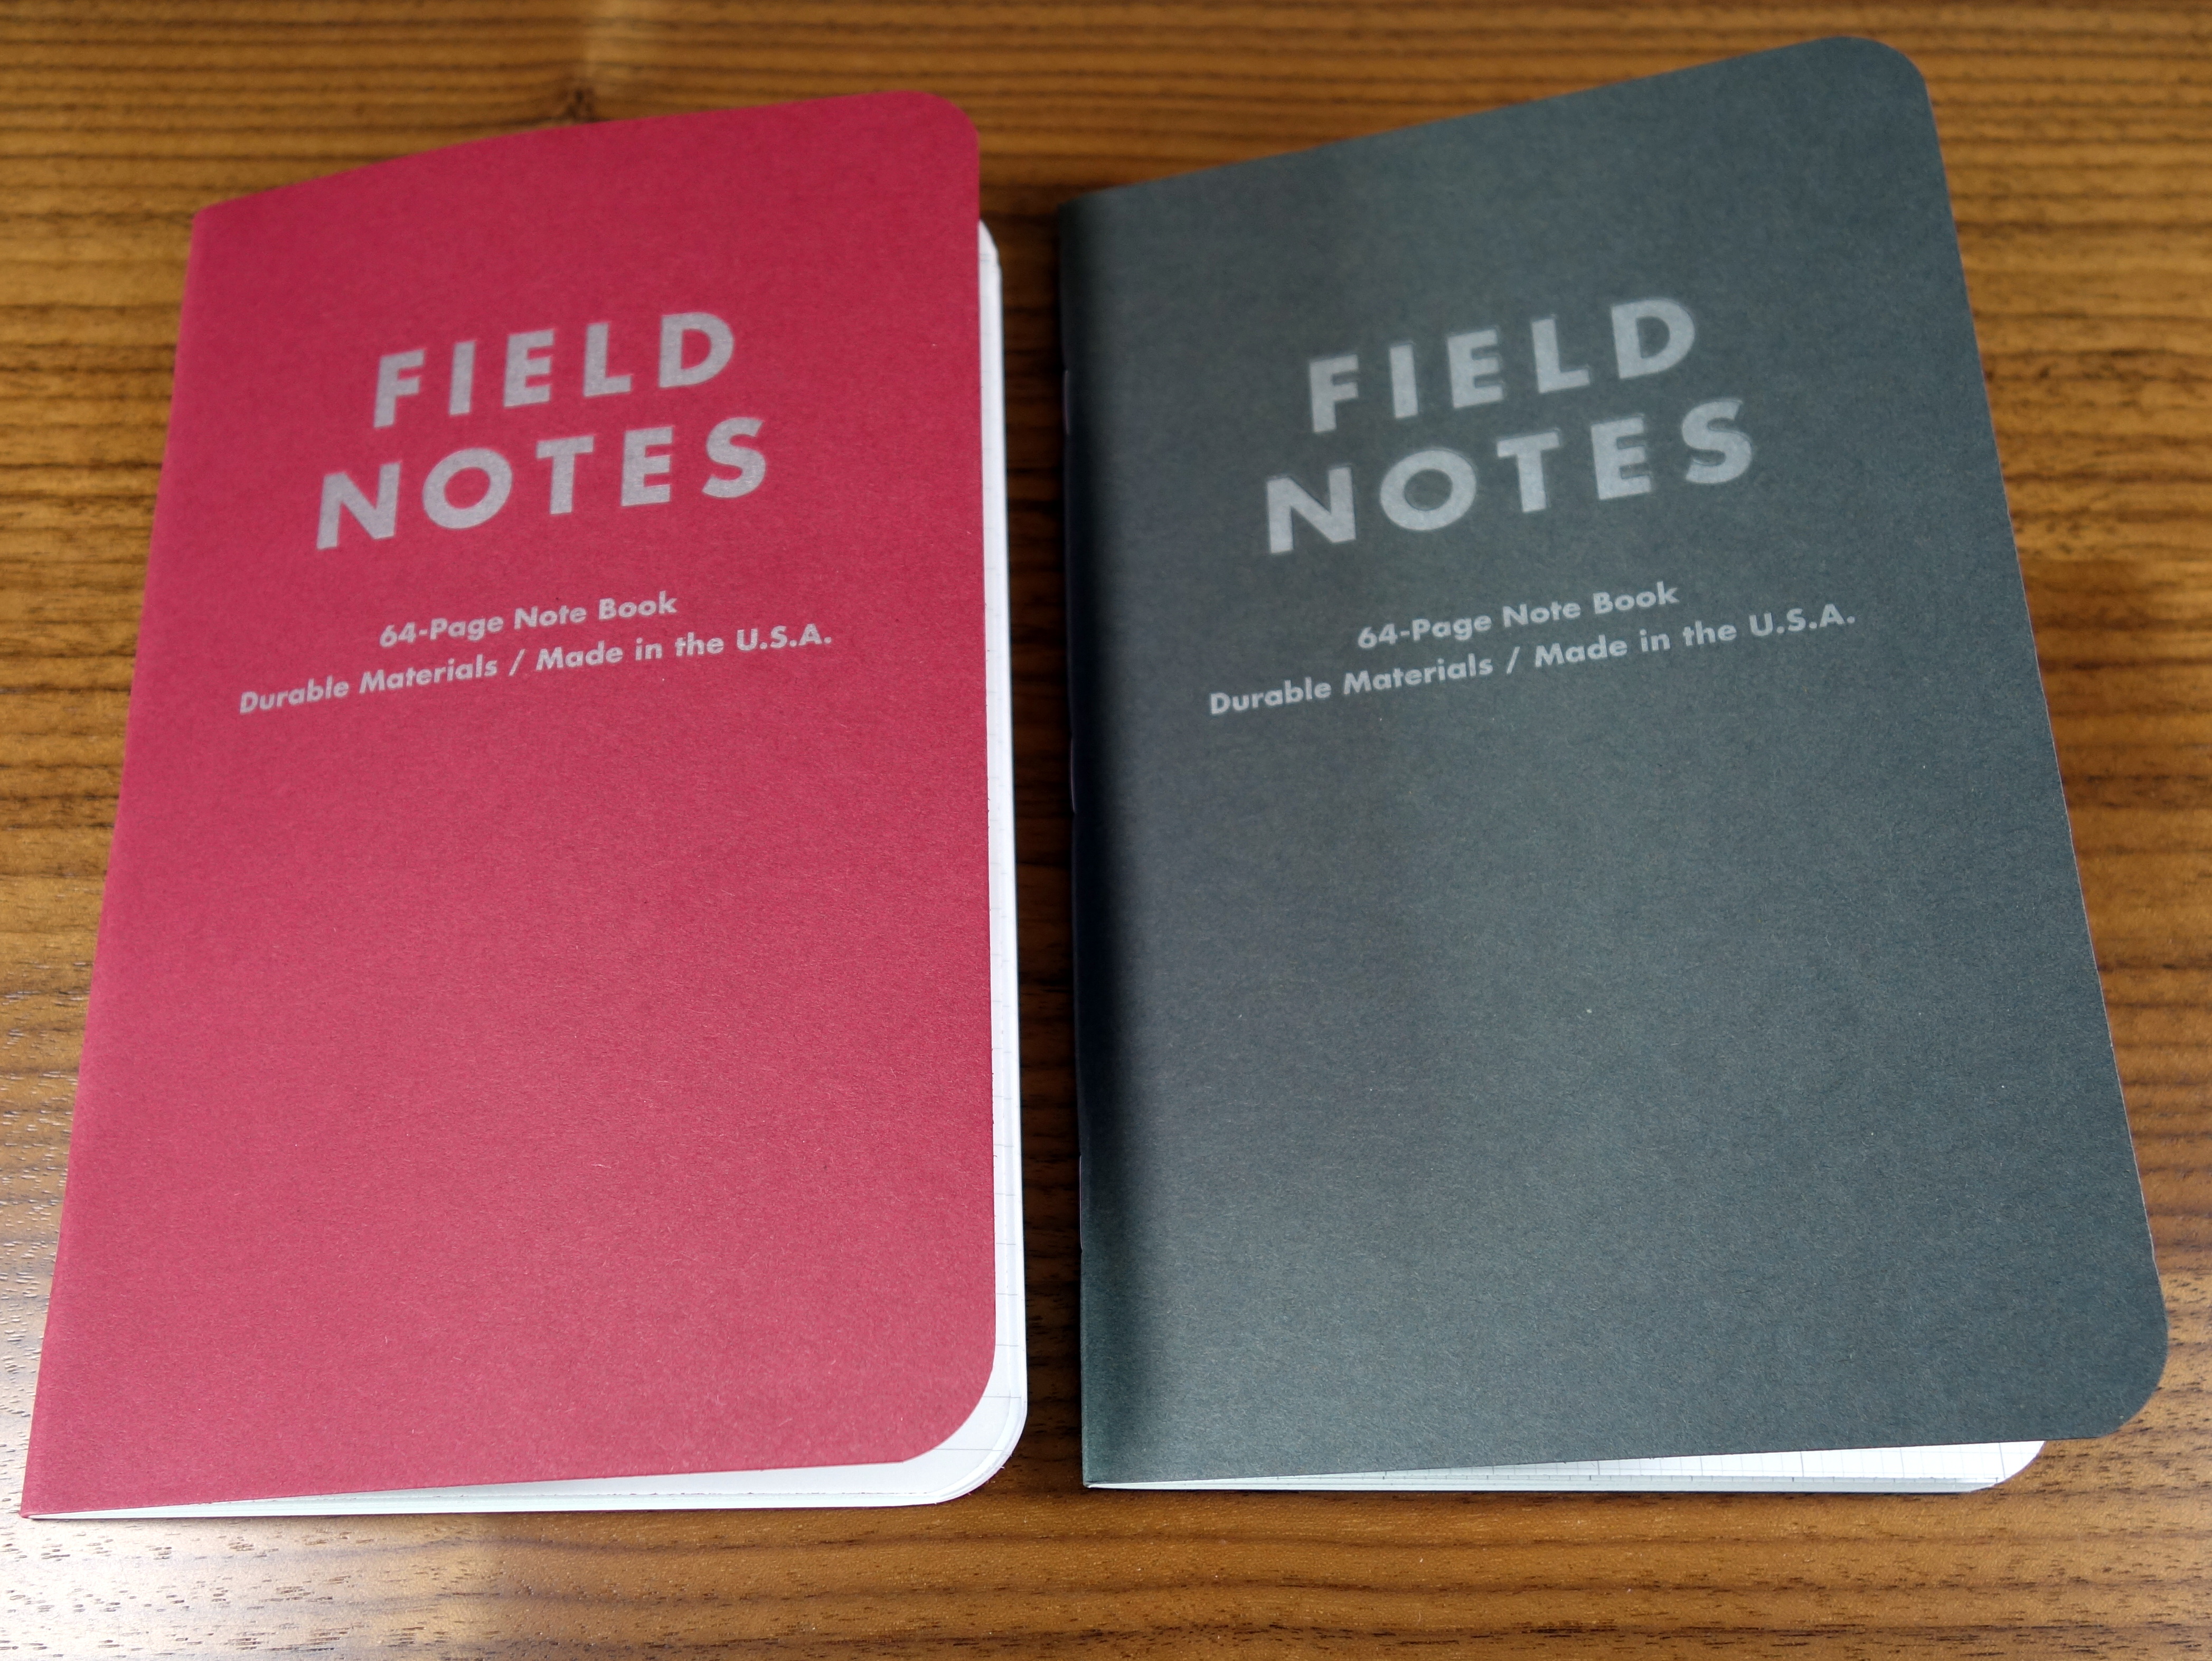 Field Notes Arts and Sciences Edition